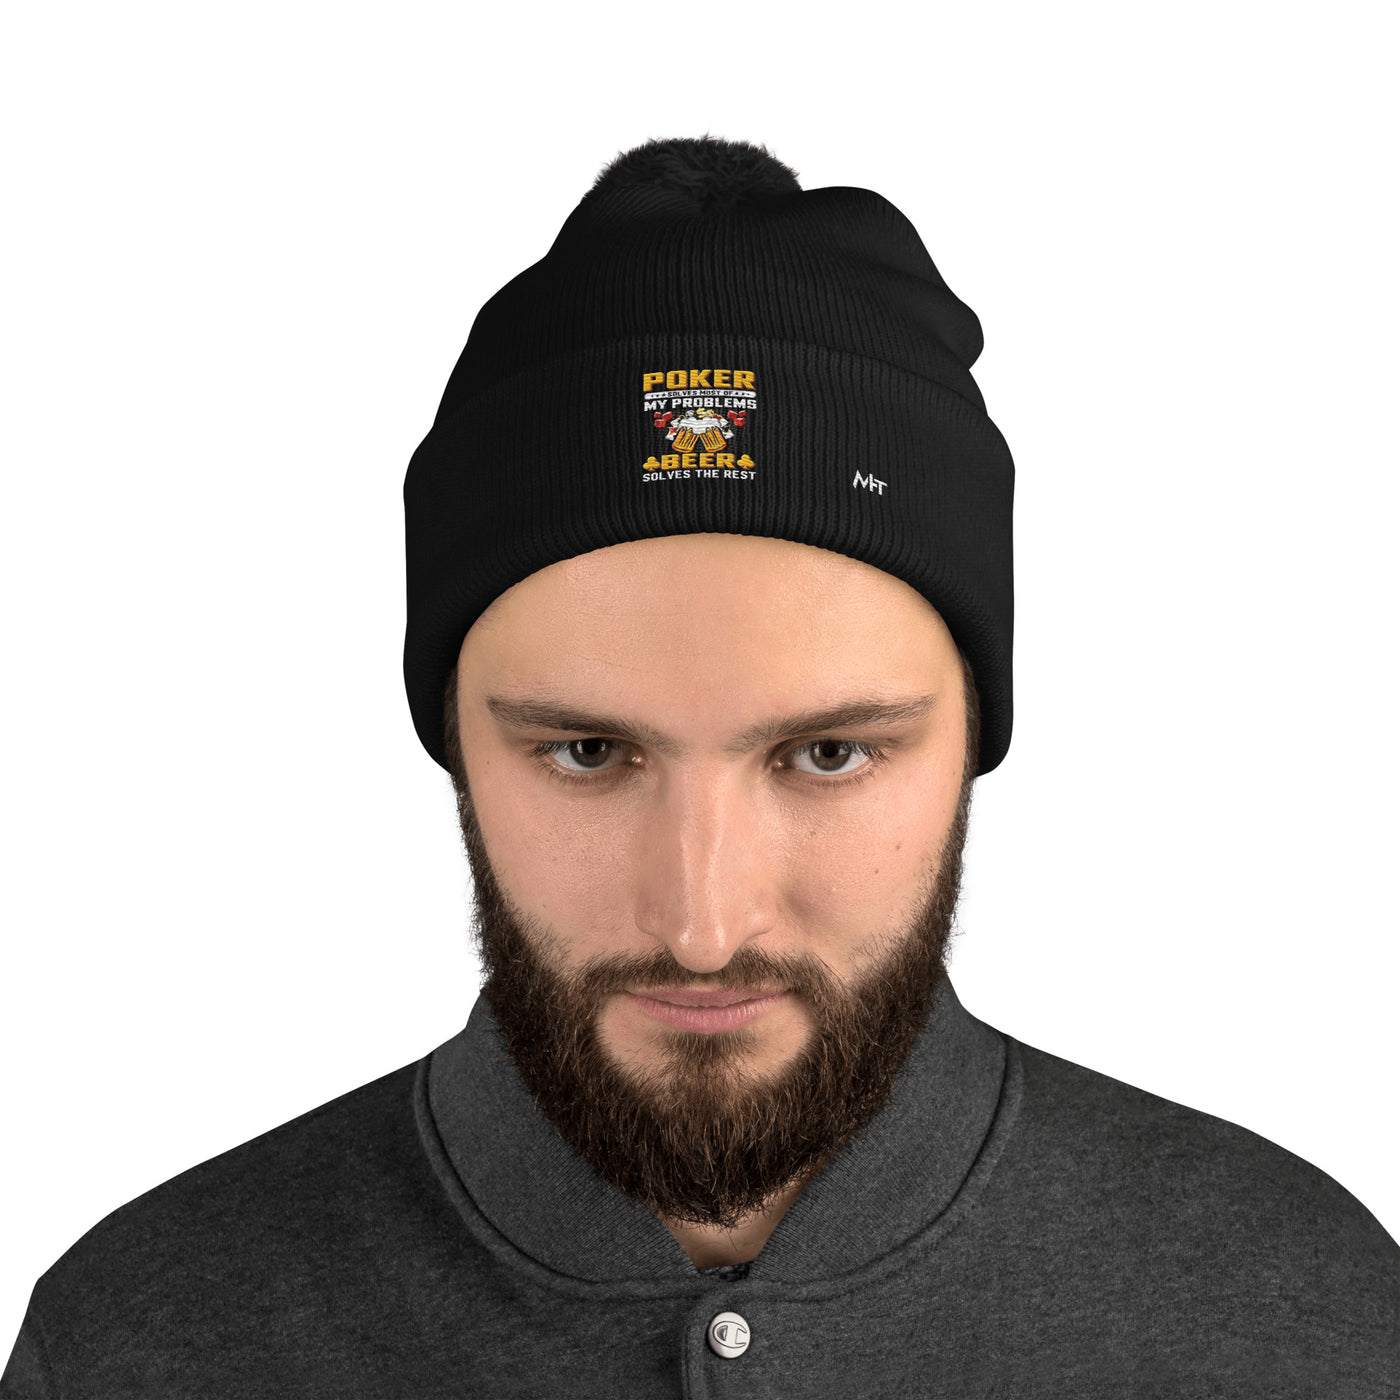 Poker Solves Most of My Problems, but Beer Solves the Rest - Pom-Pom Beanie